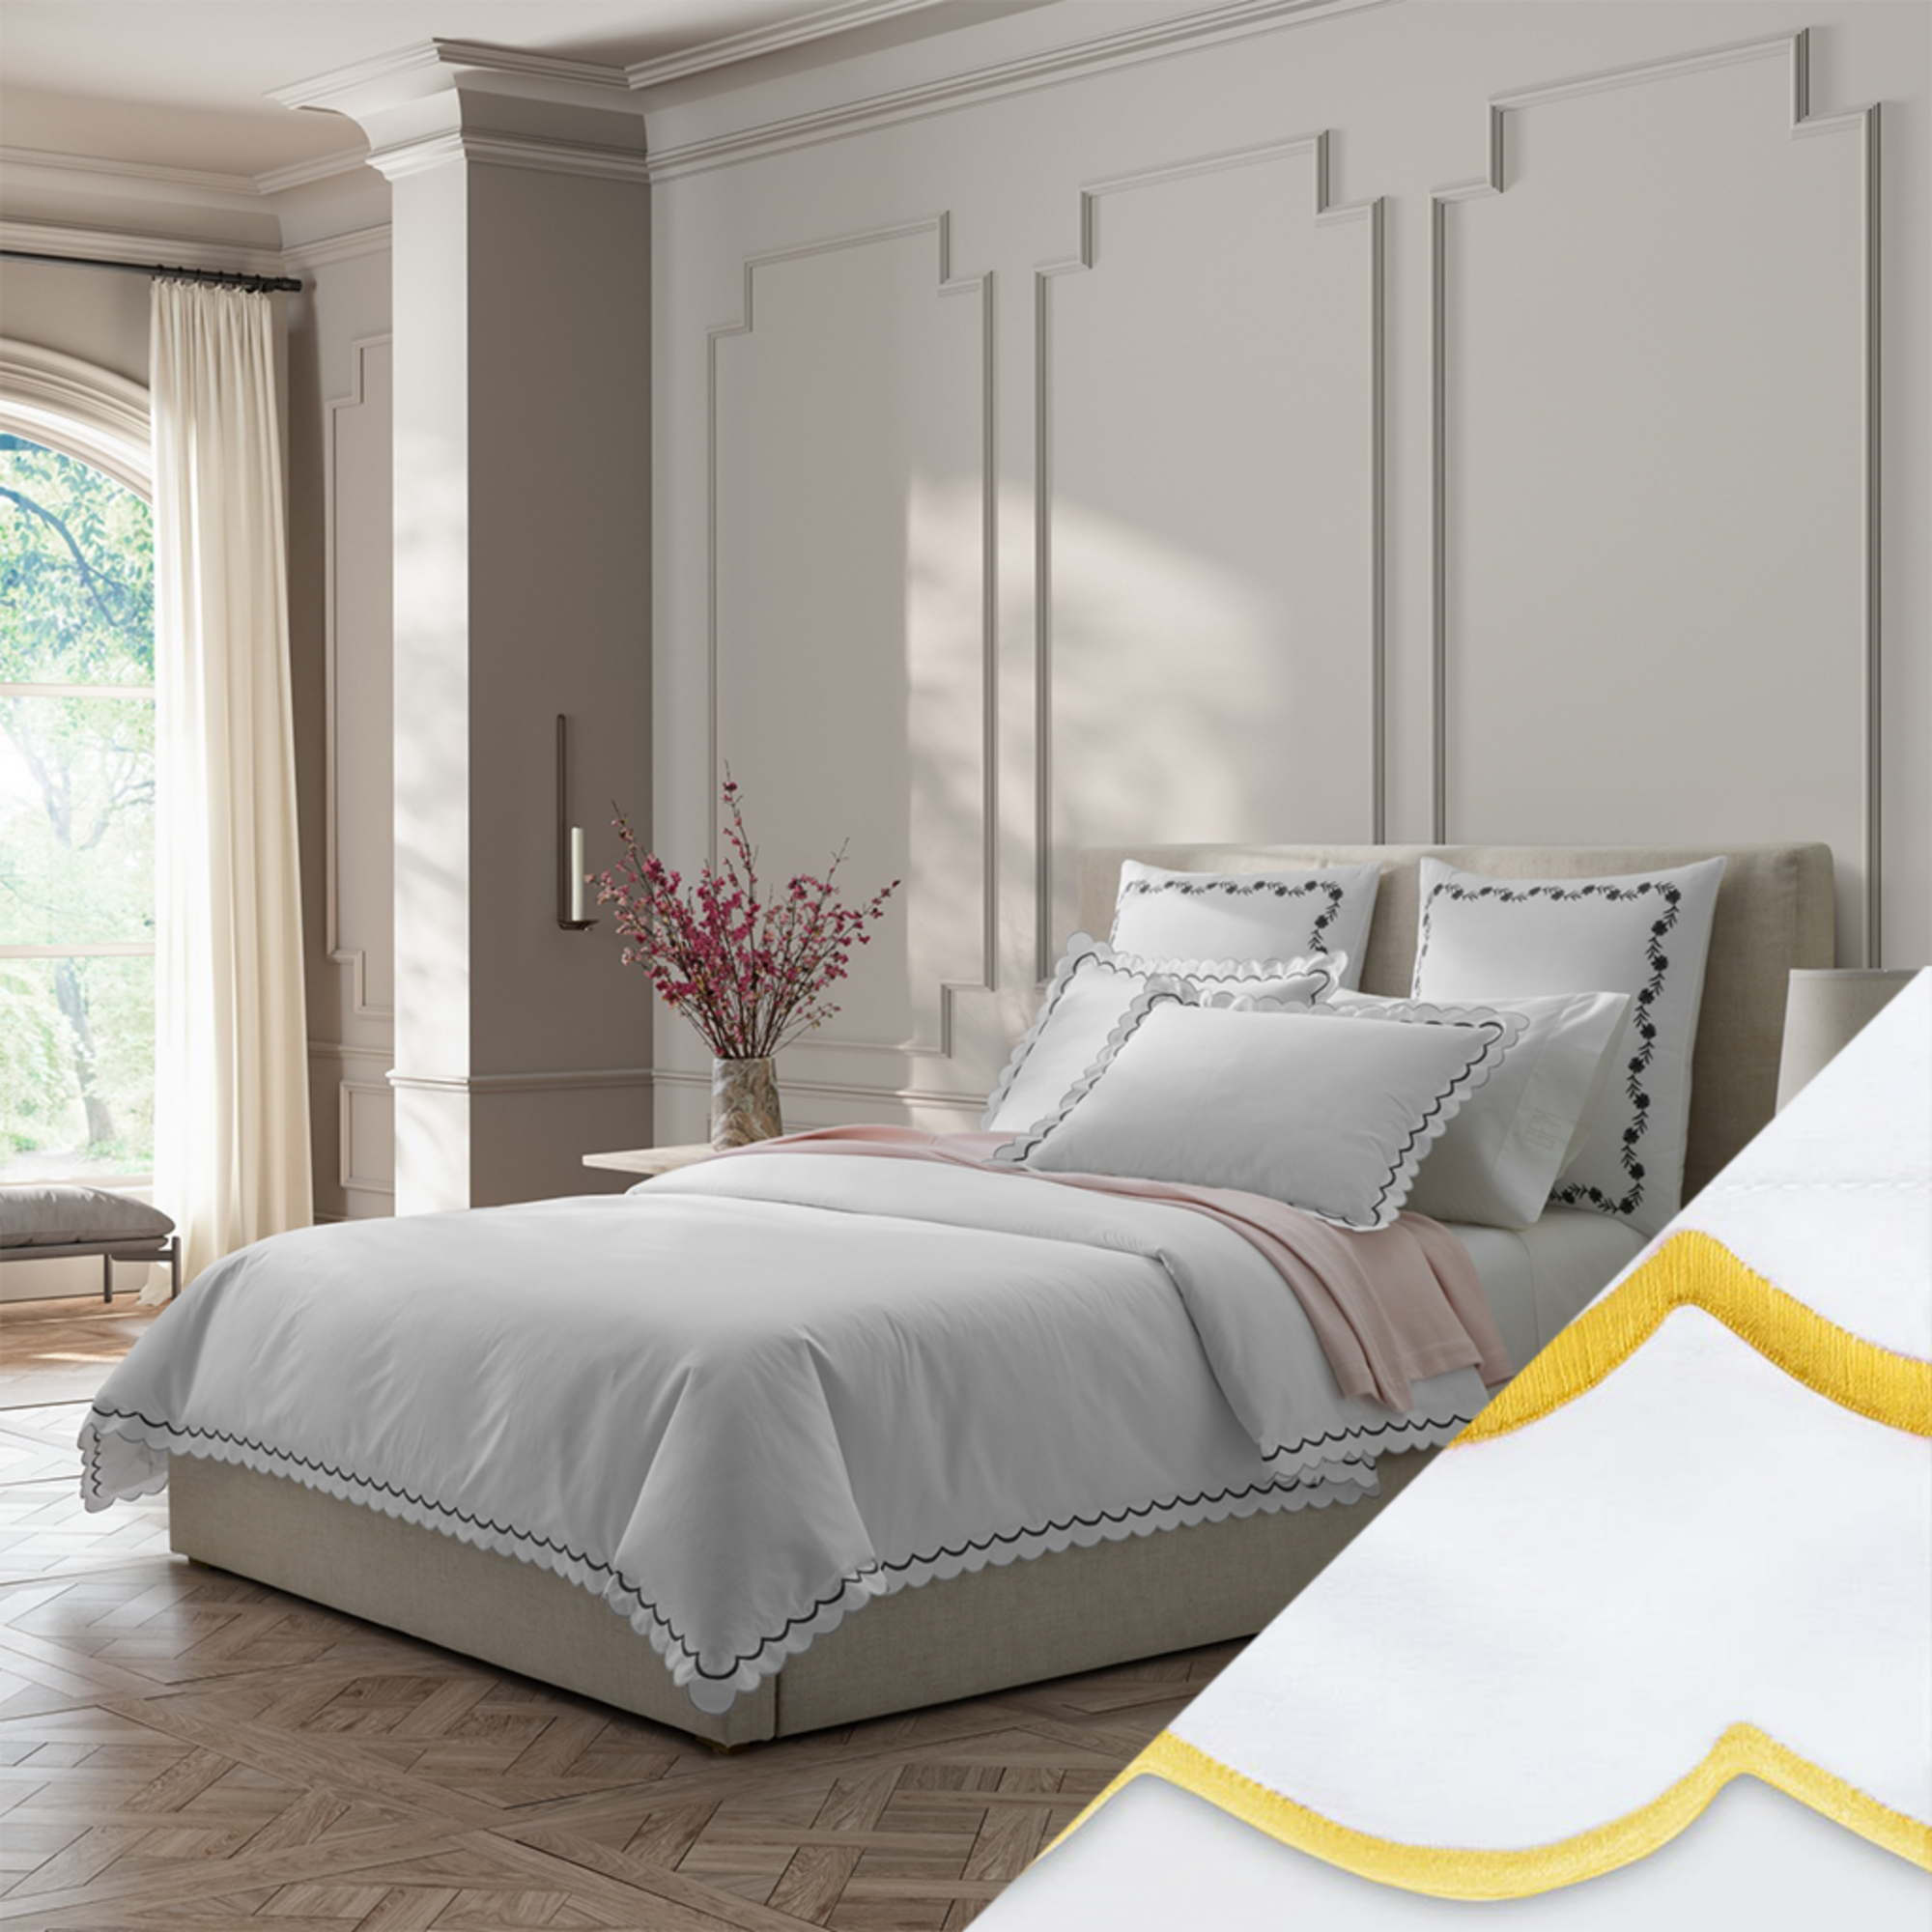 Full Bed Dressed in Matouk India Bedding in Charcoal Color with Lemon Swatch